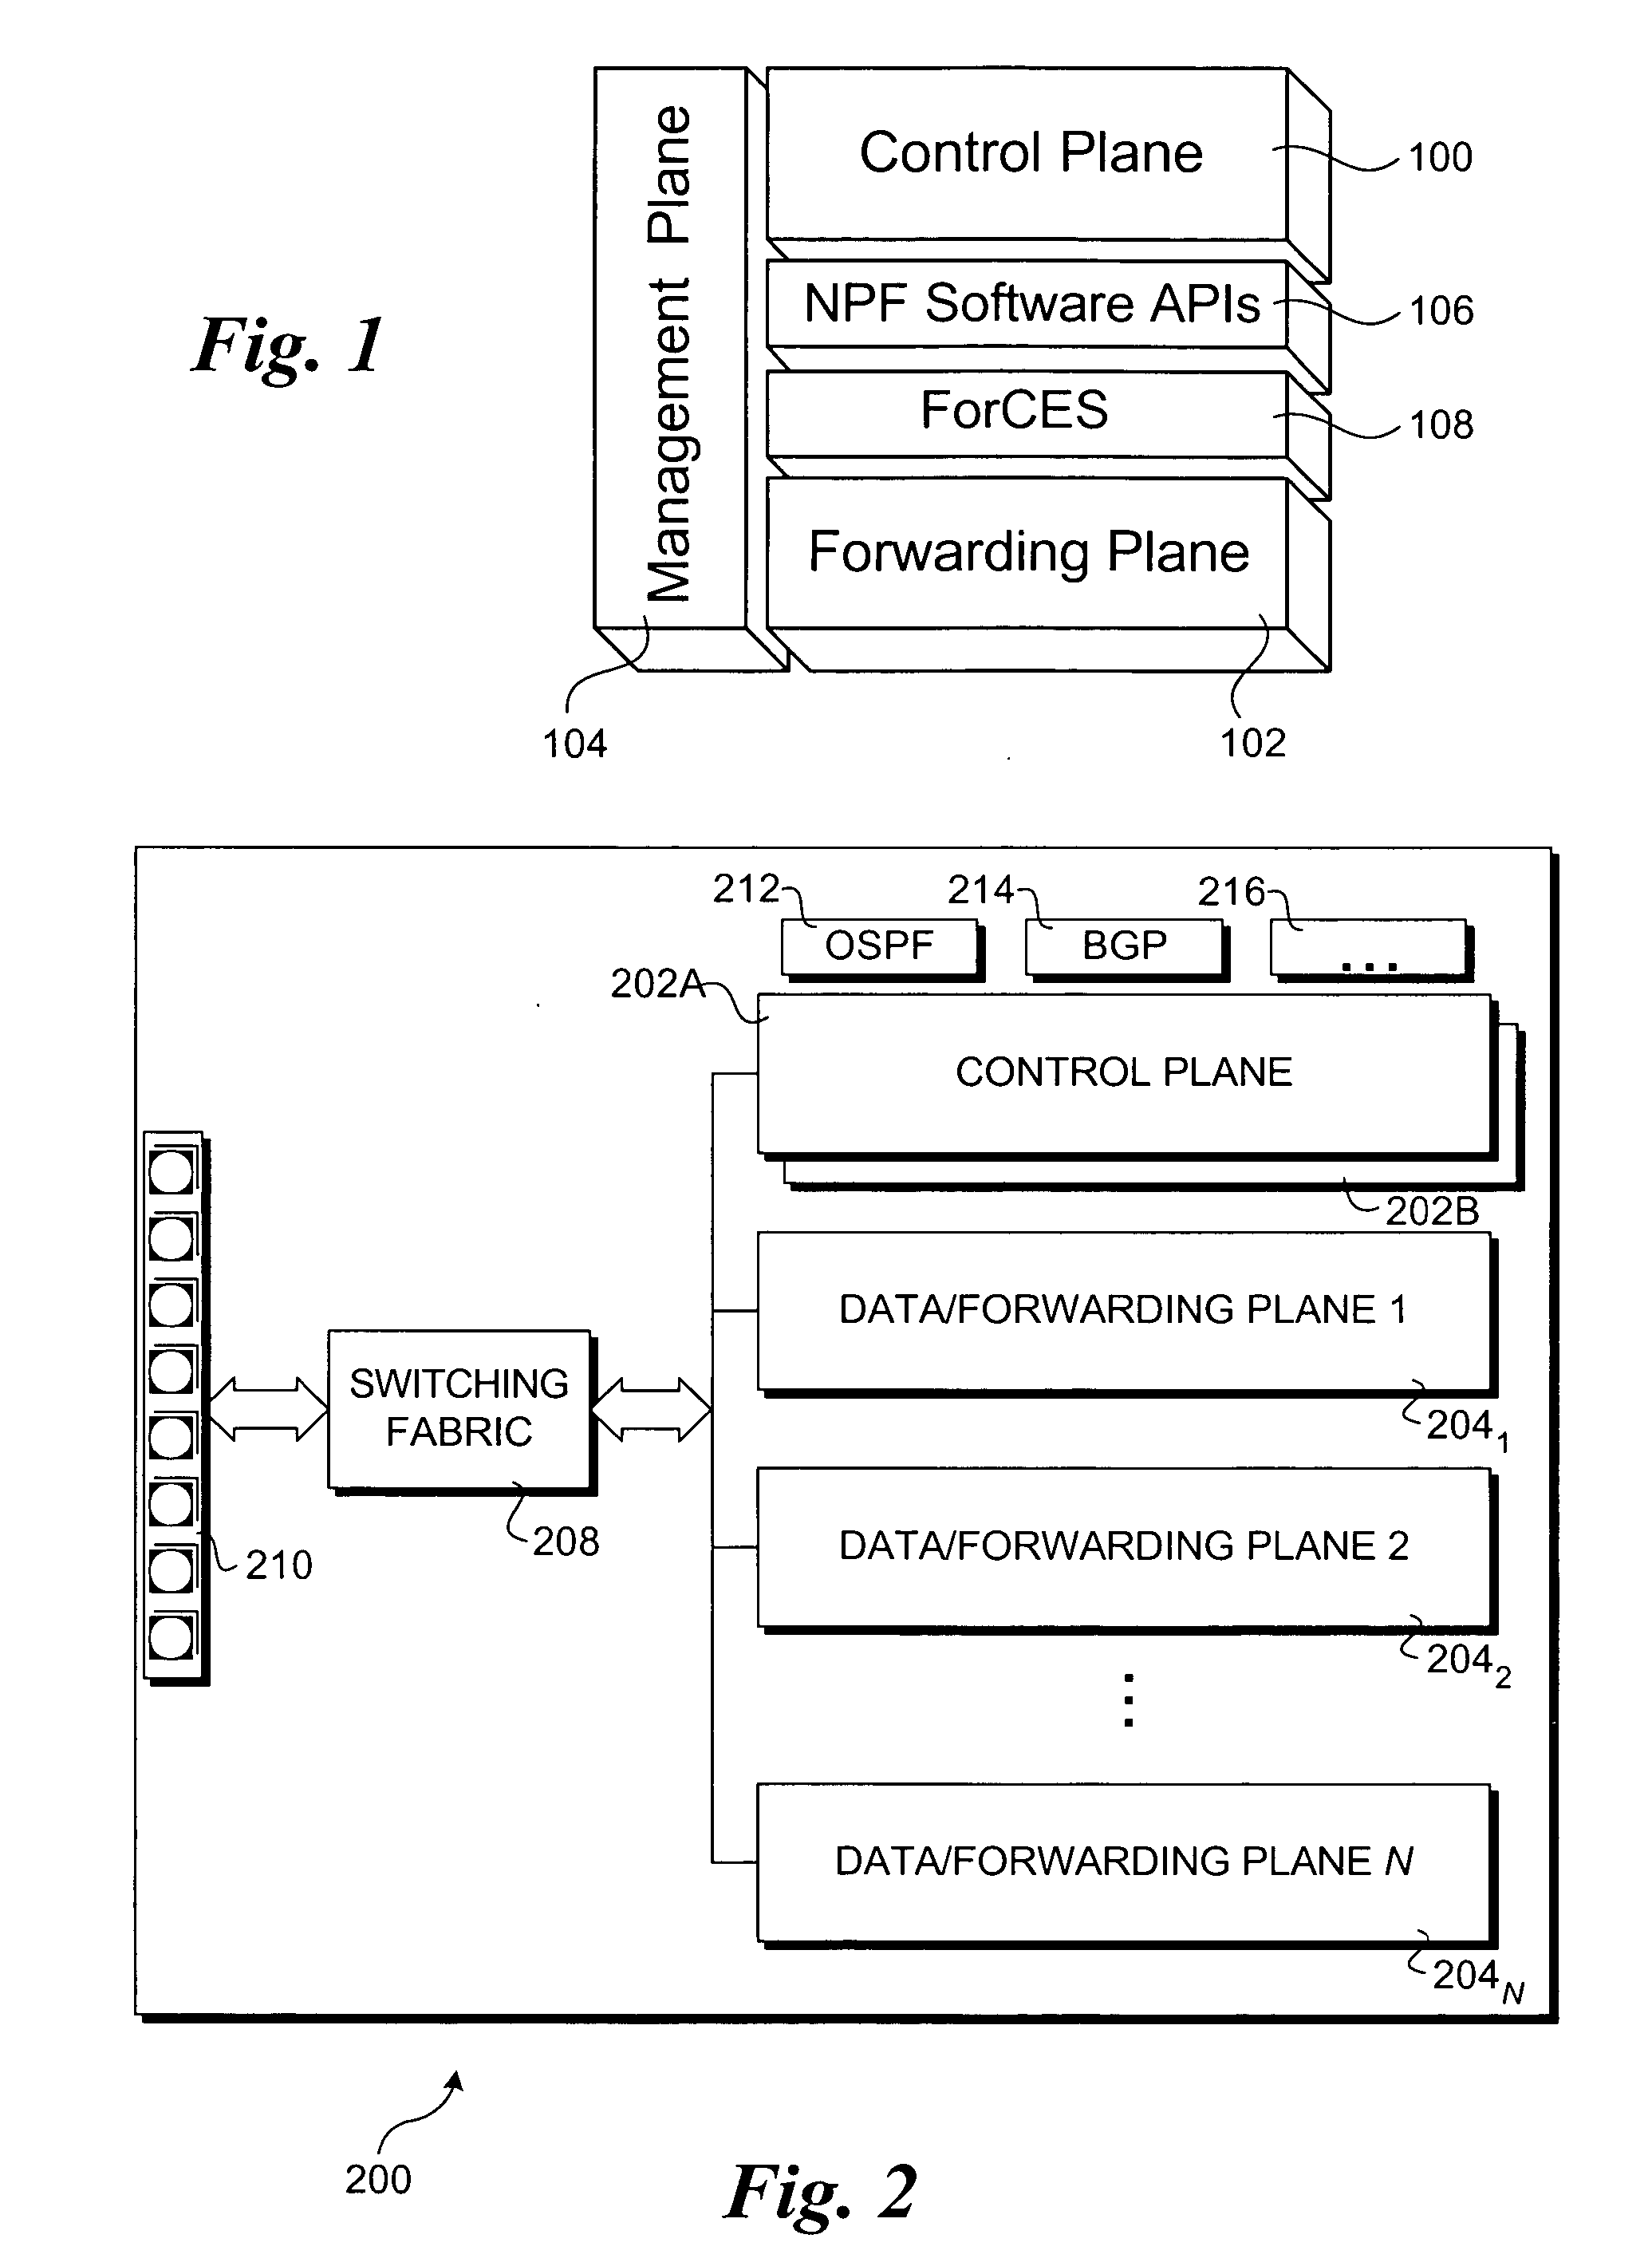 Method to provide high availability in network elements using distributed architectures